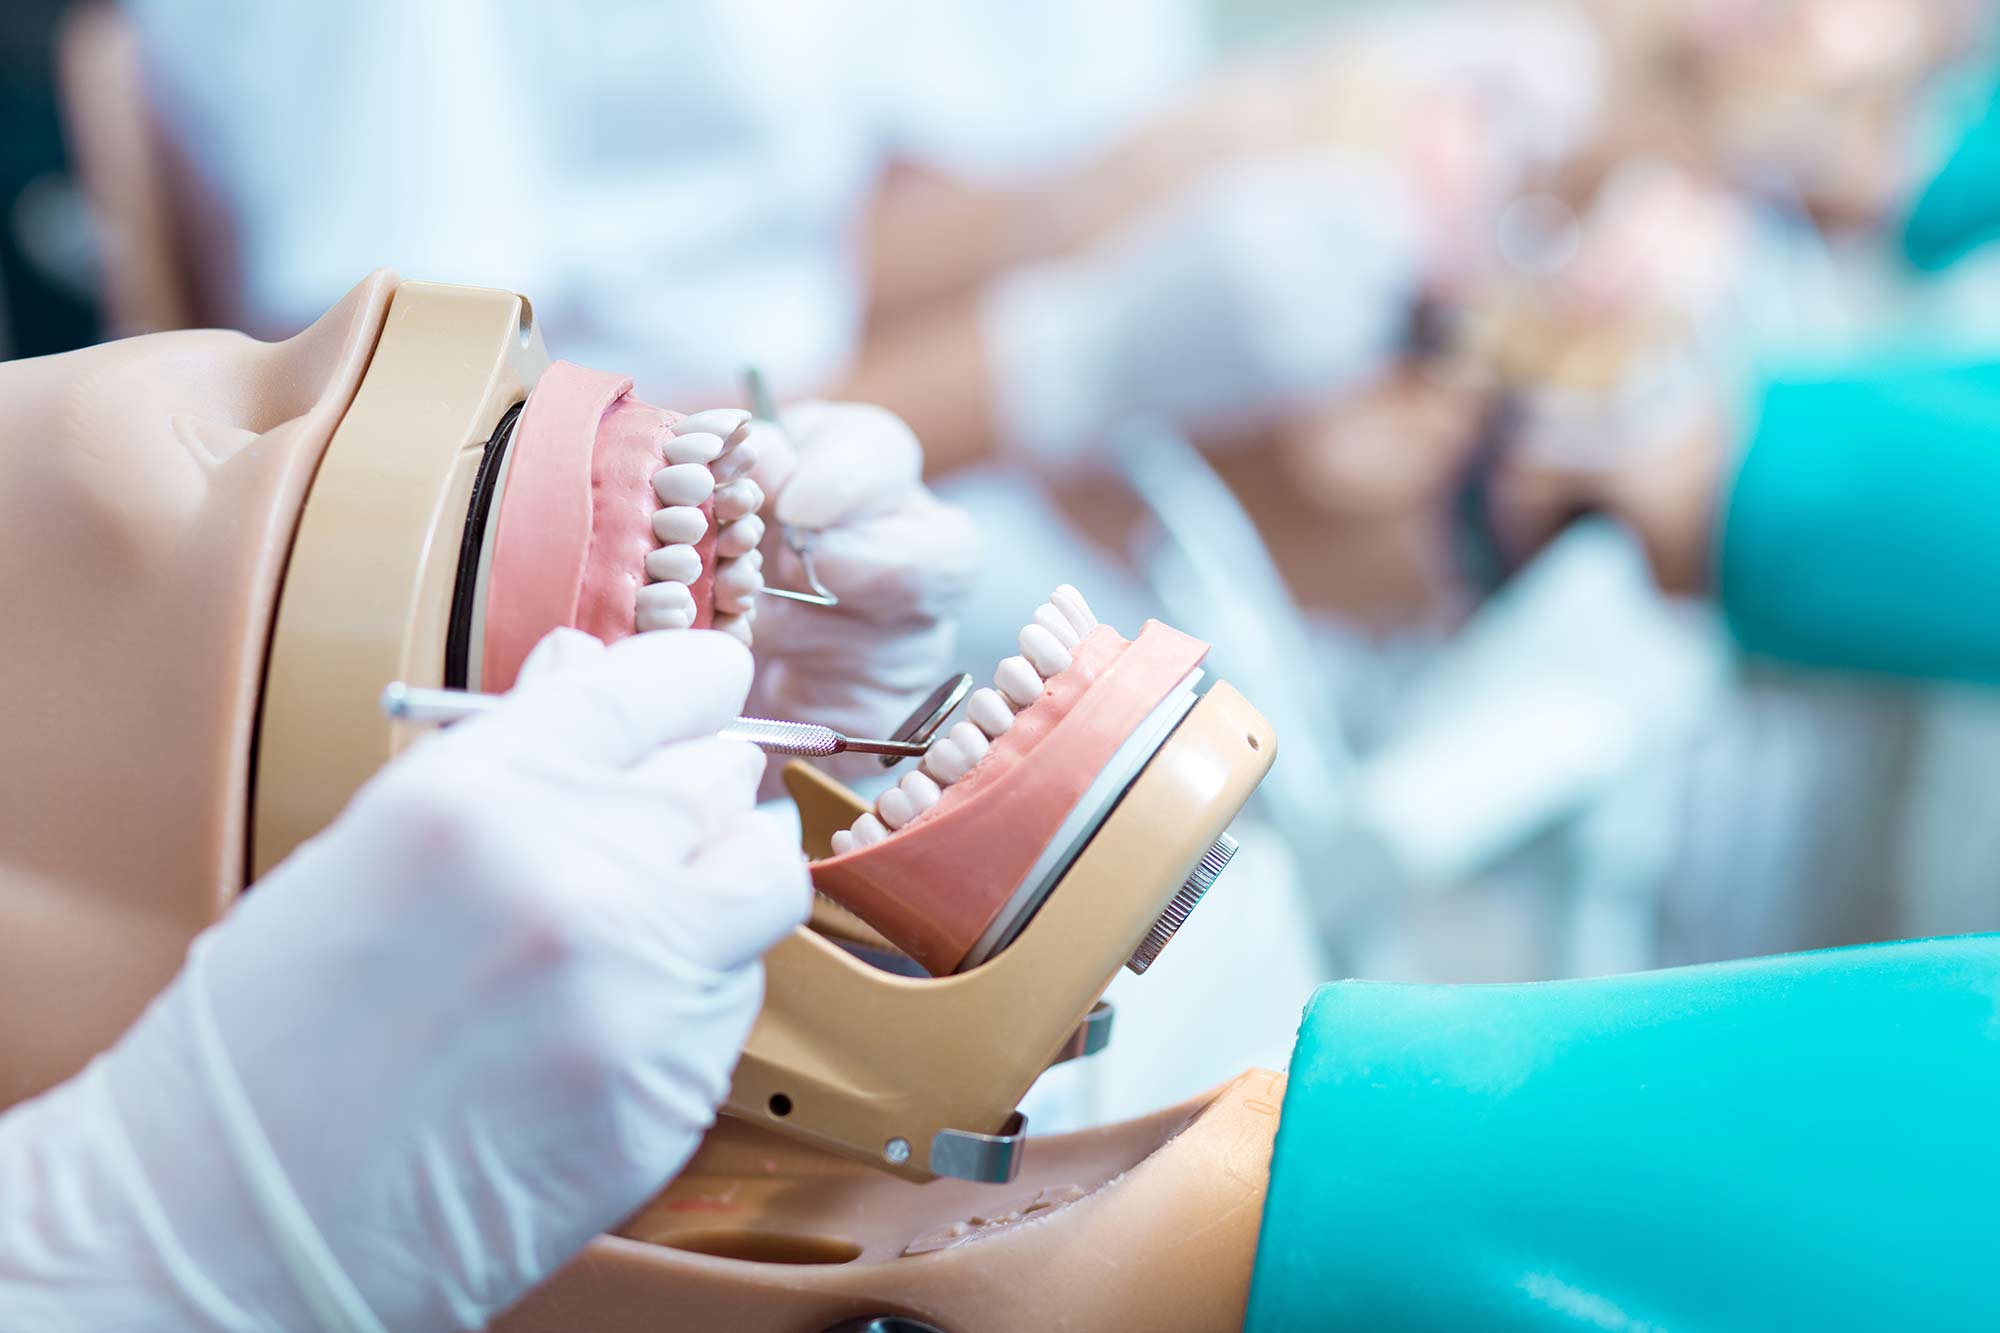 The COVID-19 pandemic has impacted all areas of the dental profession. But what's been the impact on dental students?